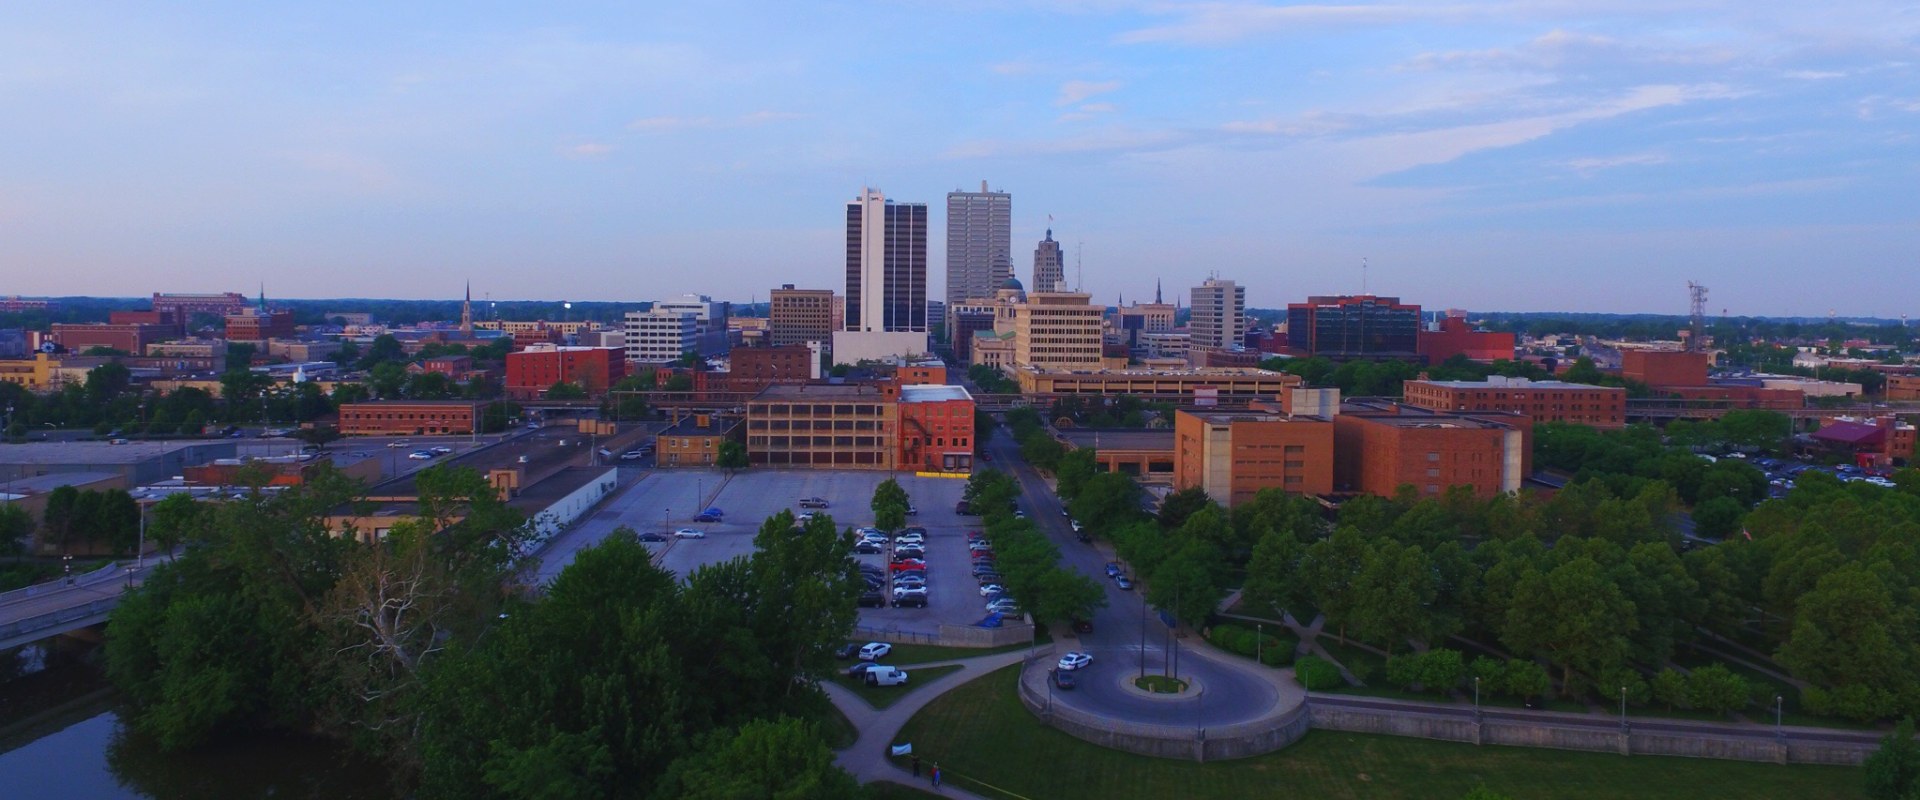 What is the city of fort wayne known for?